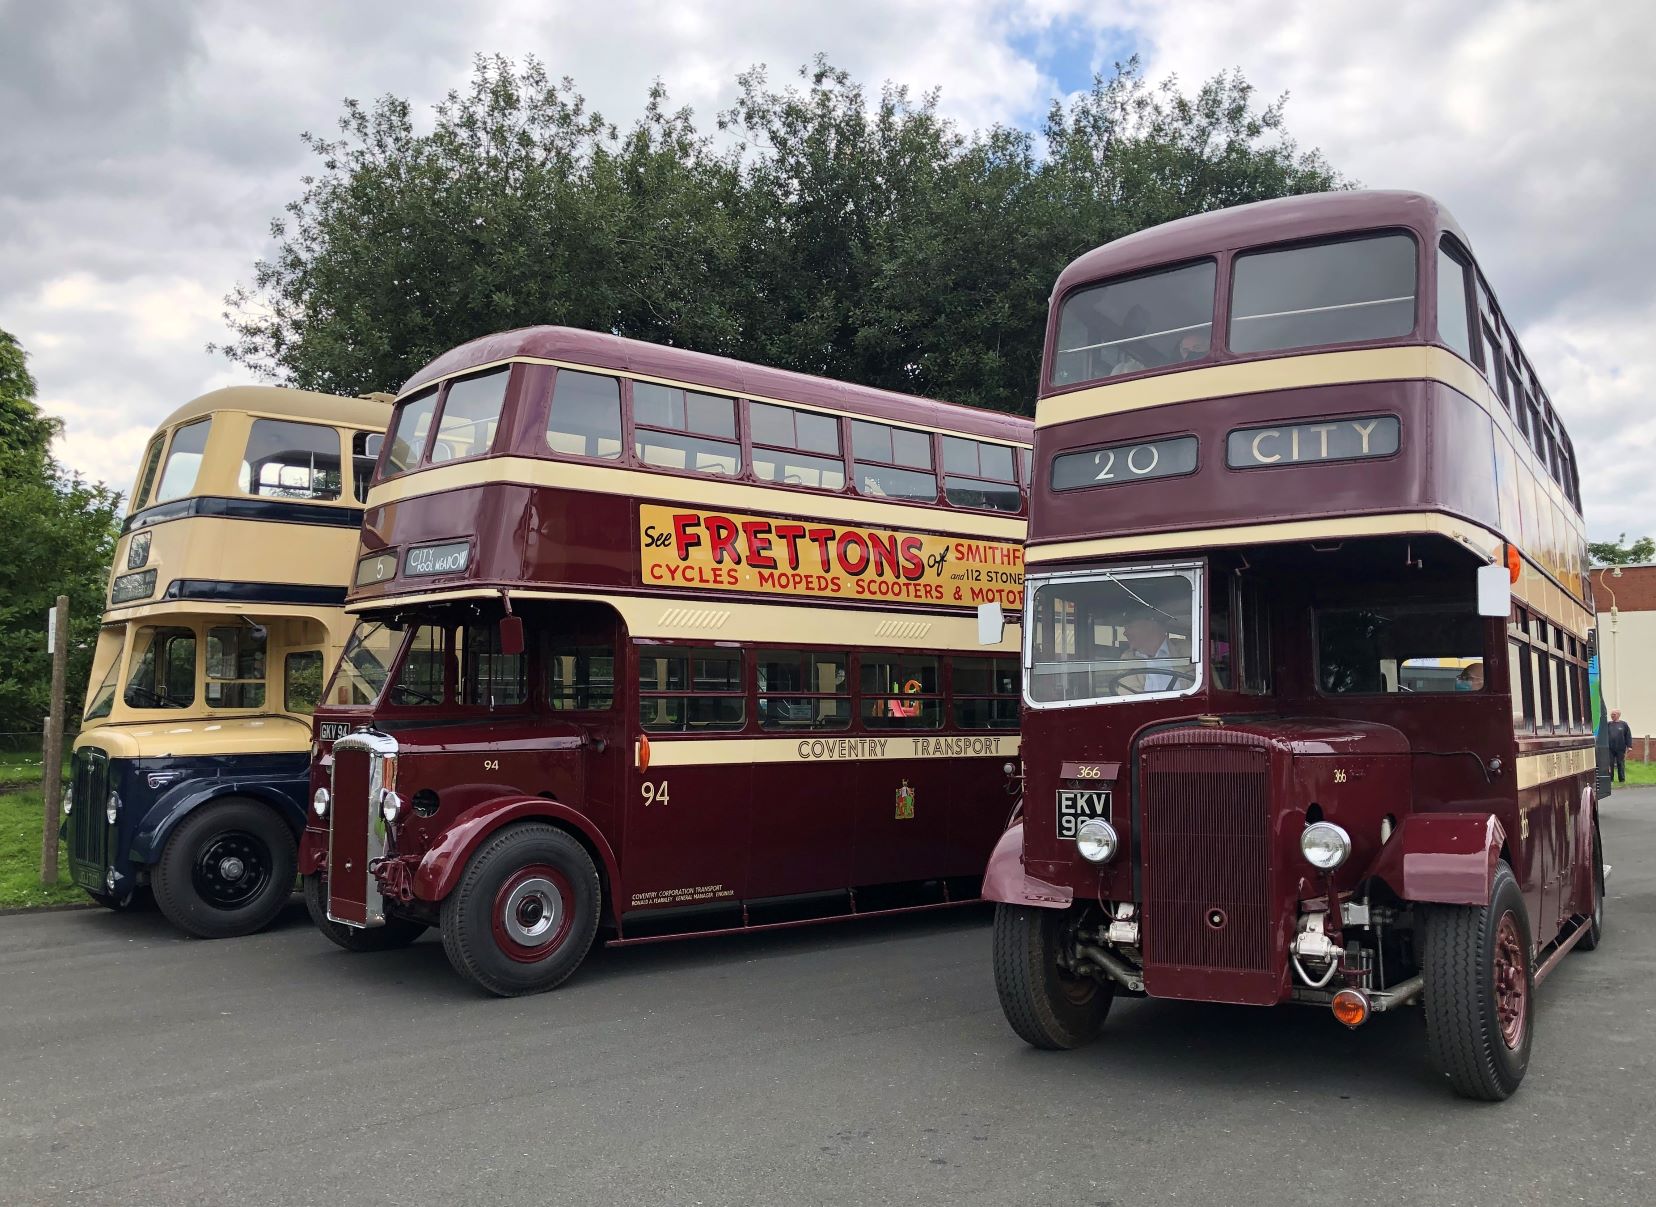 Bank Holiday success for Transport Museum